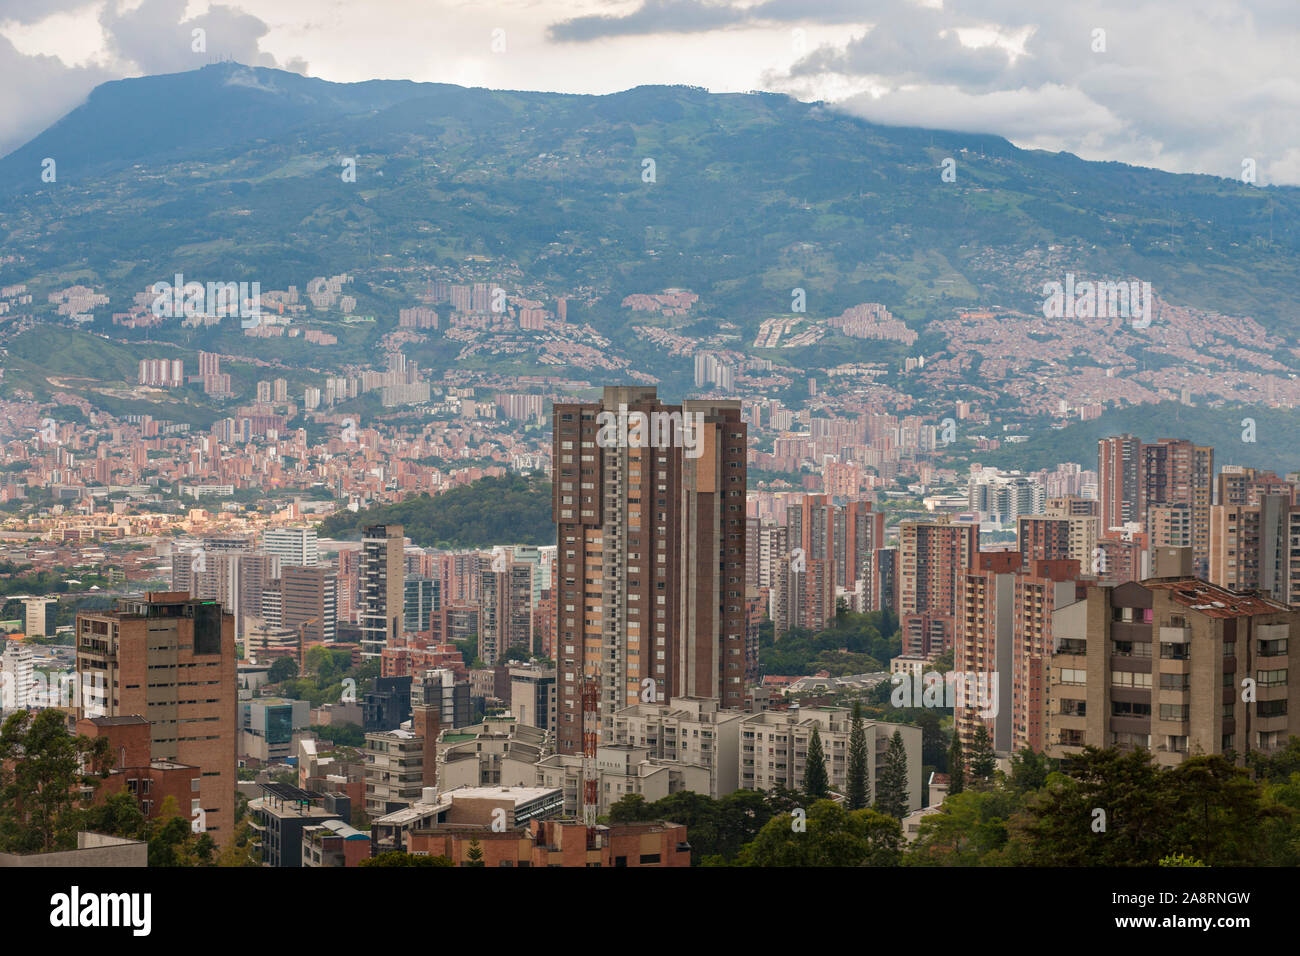 View of Poblado district (comuna 14) looking towards comunas 15 & 16 and taken from the Tesoro Shopping Centre. Stock Photo